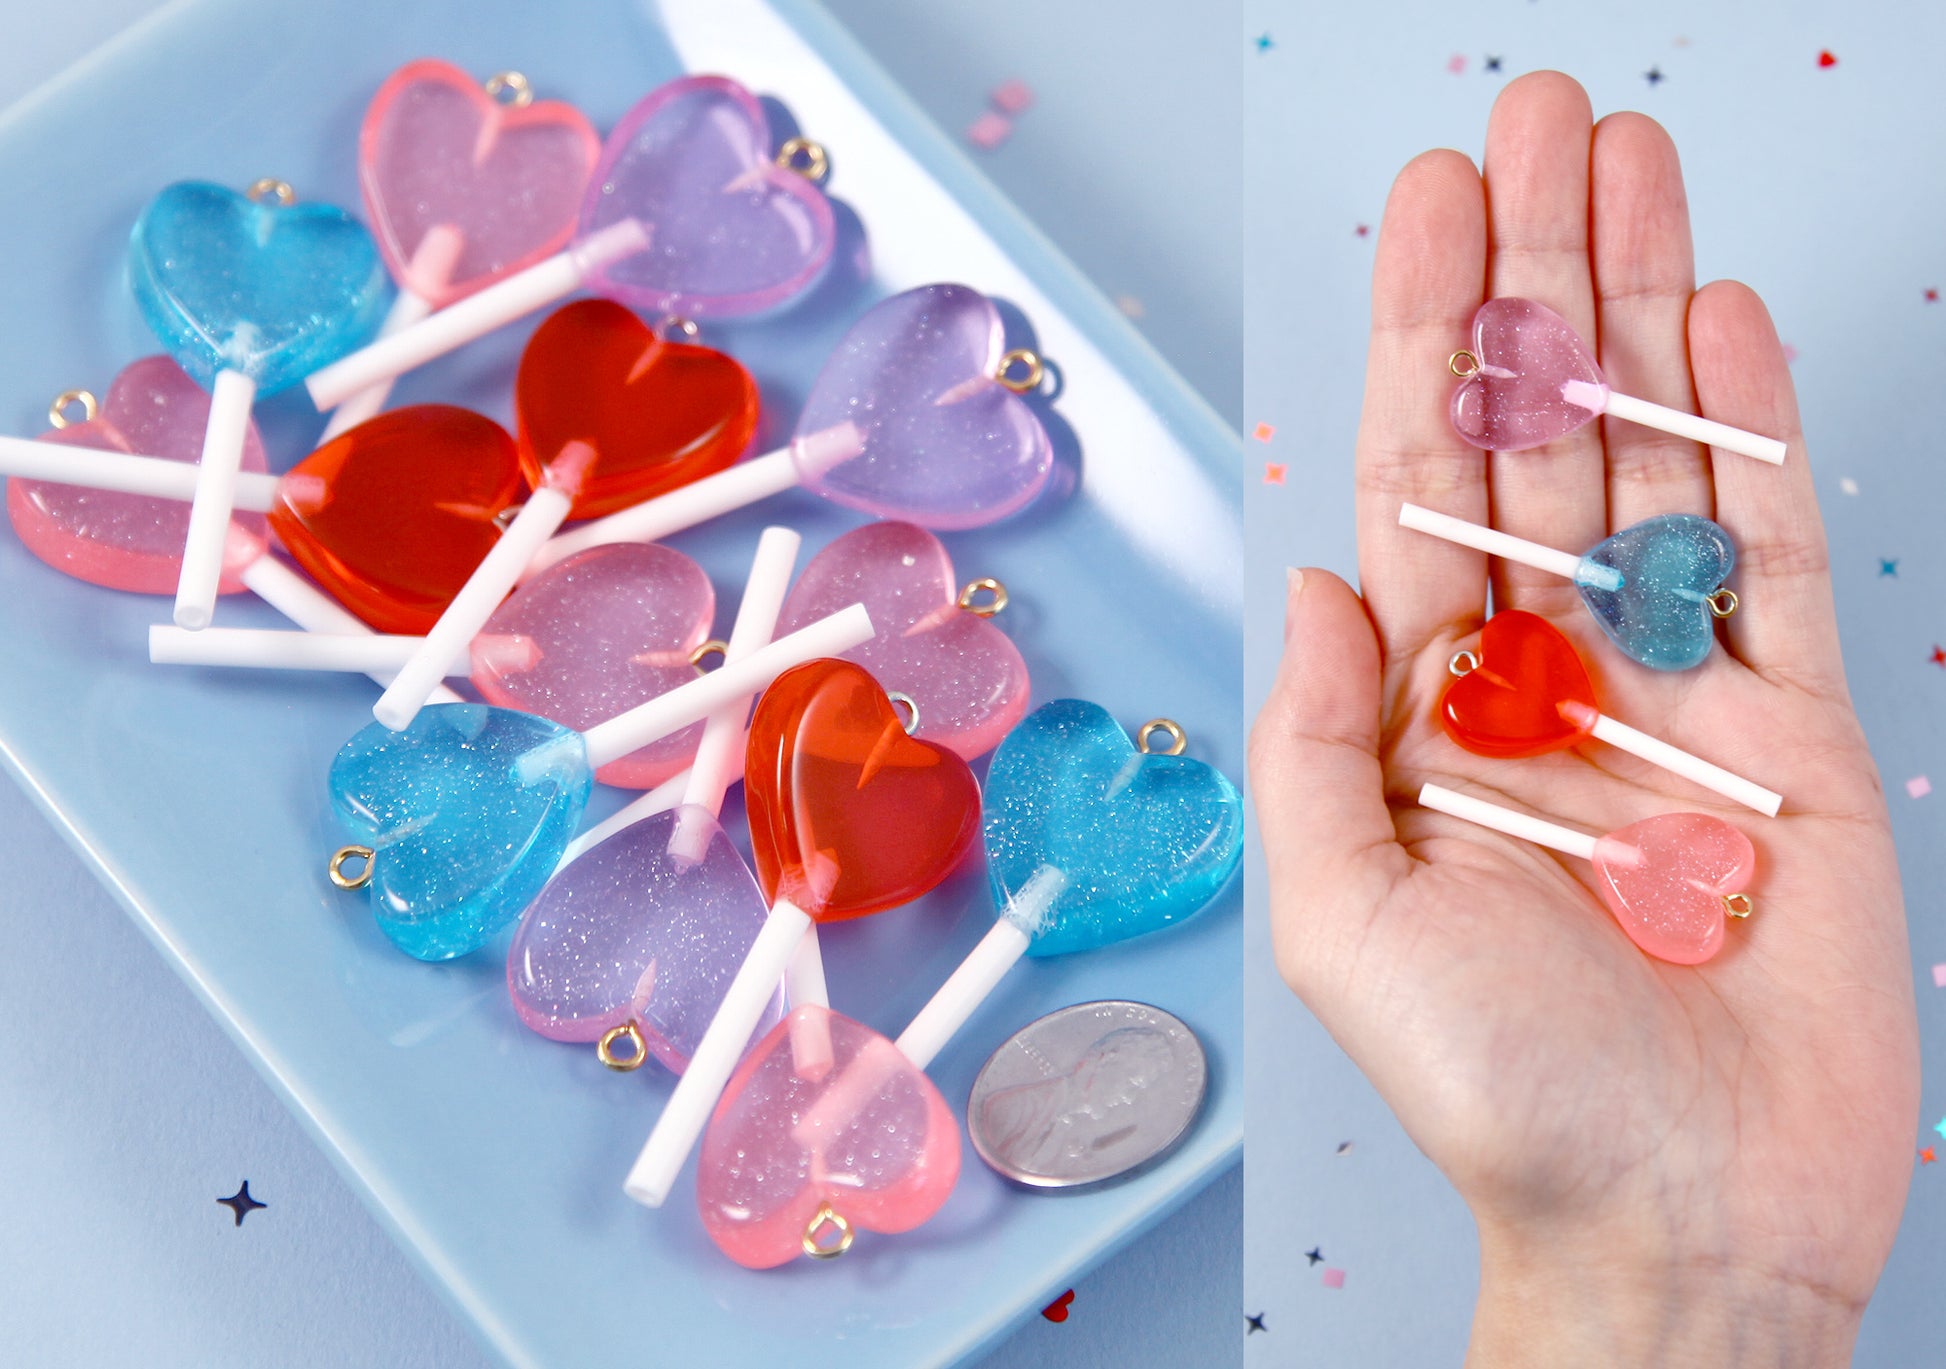 Heart Shape Lollipops Transparent Fake Candy Charm Valentine's Day Cha